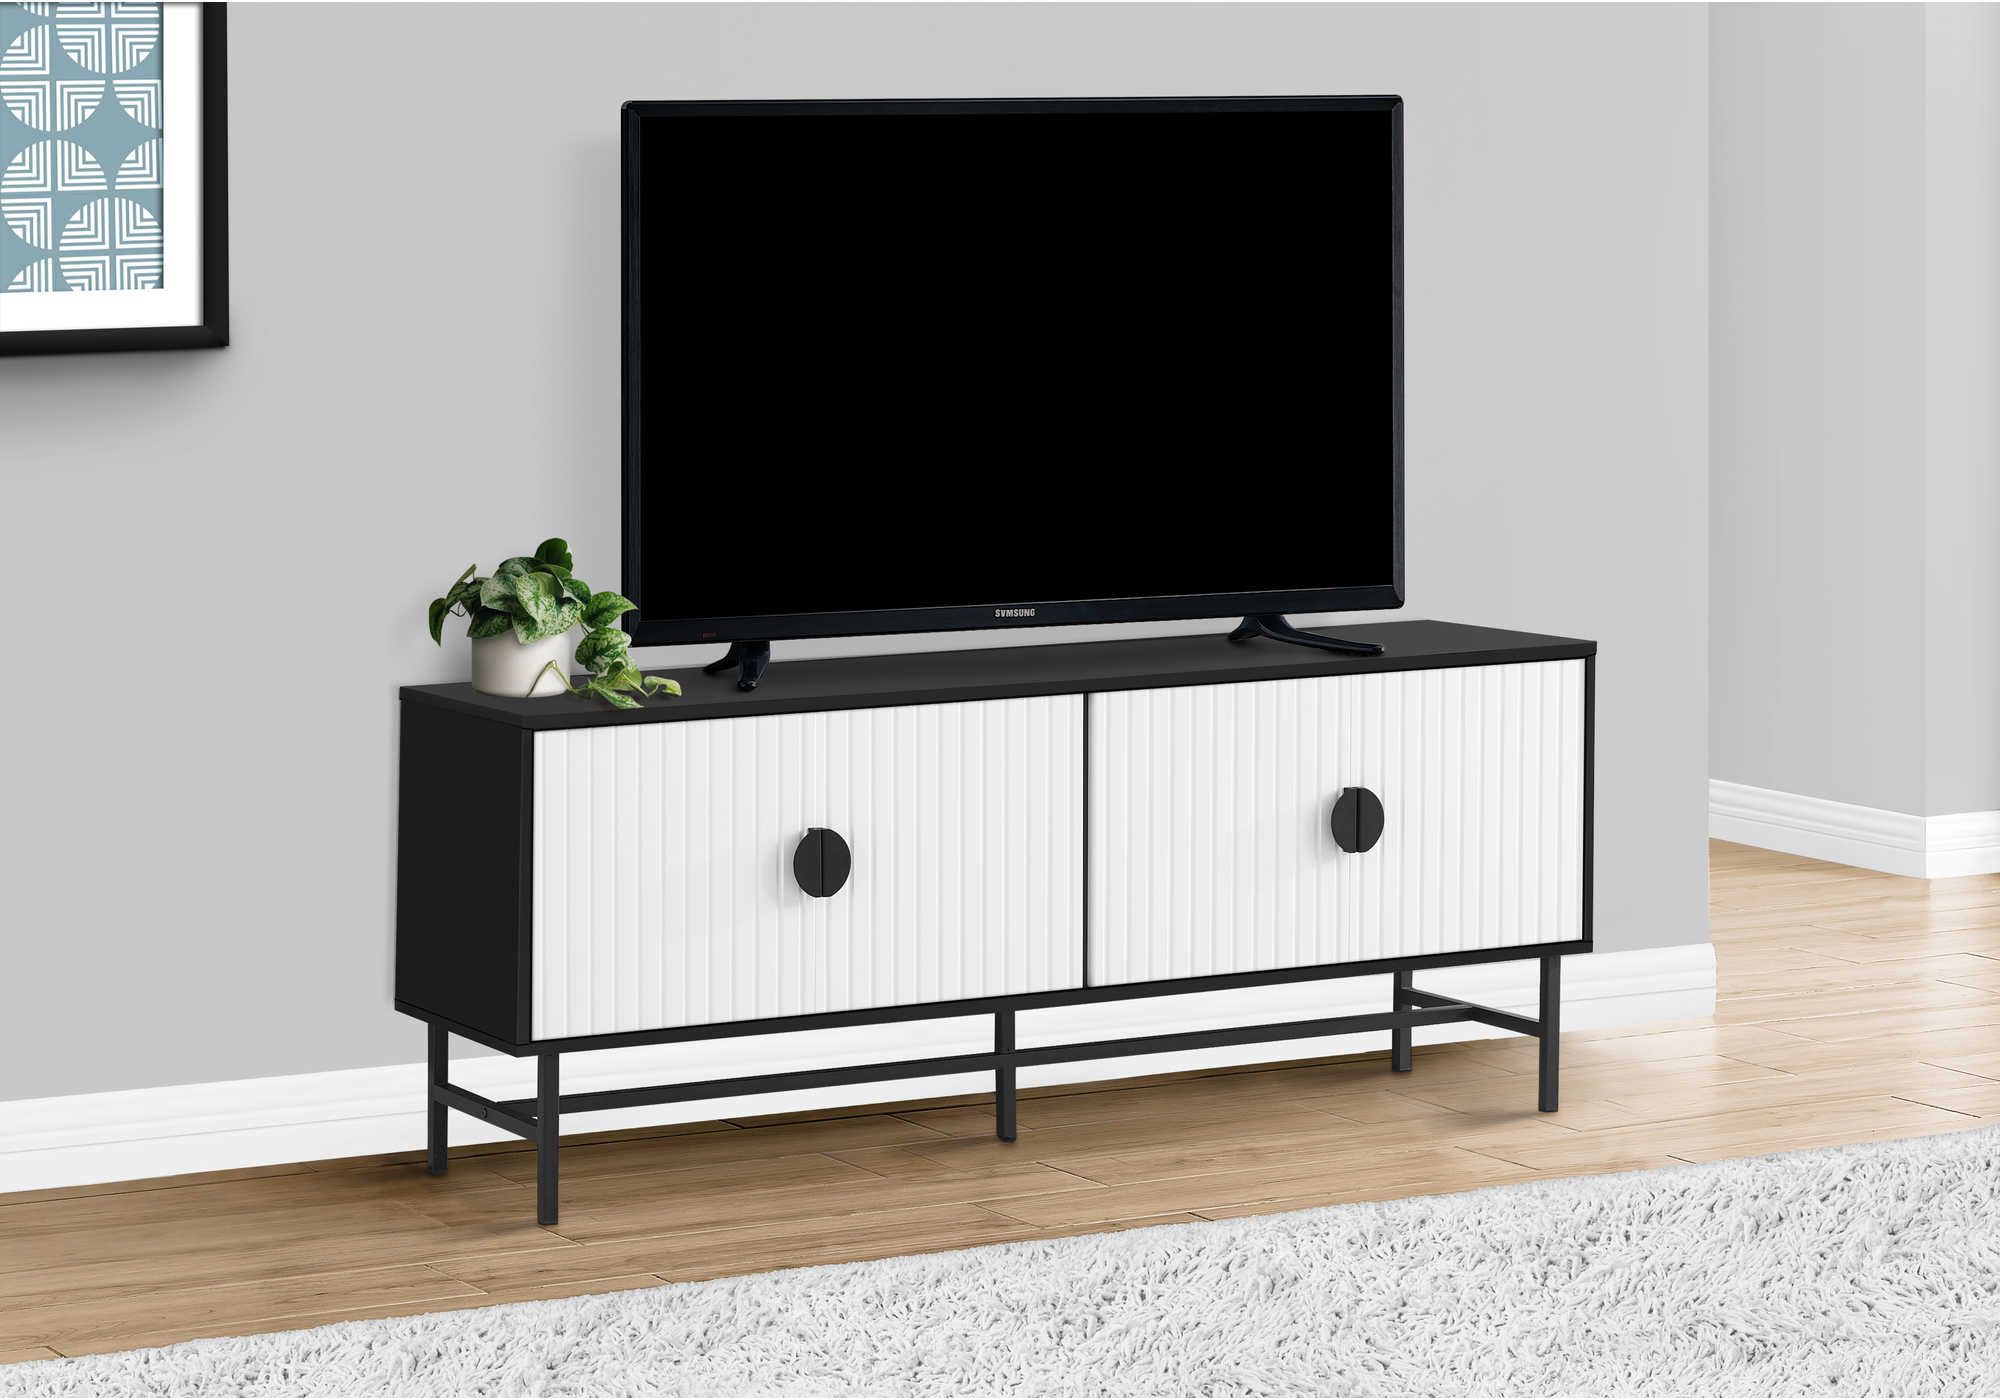 TV STAND - 60"L / BLACK / WHITE DOORS WITH BLACK METAL